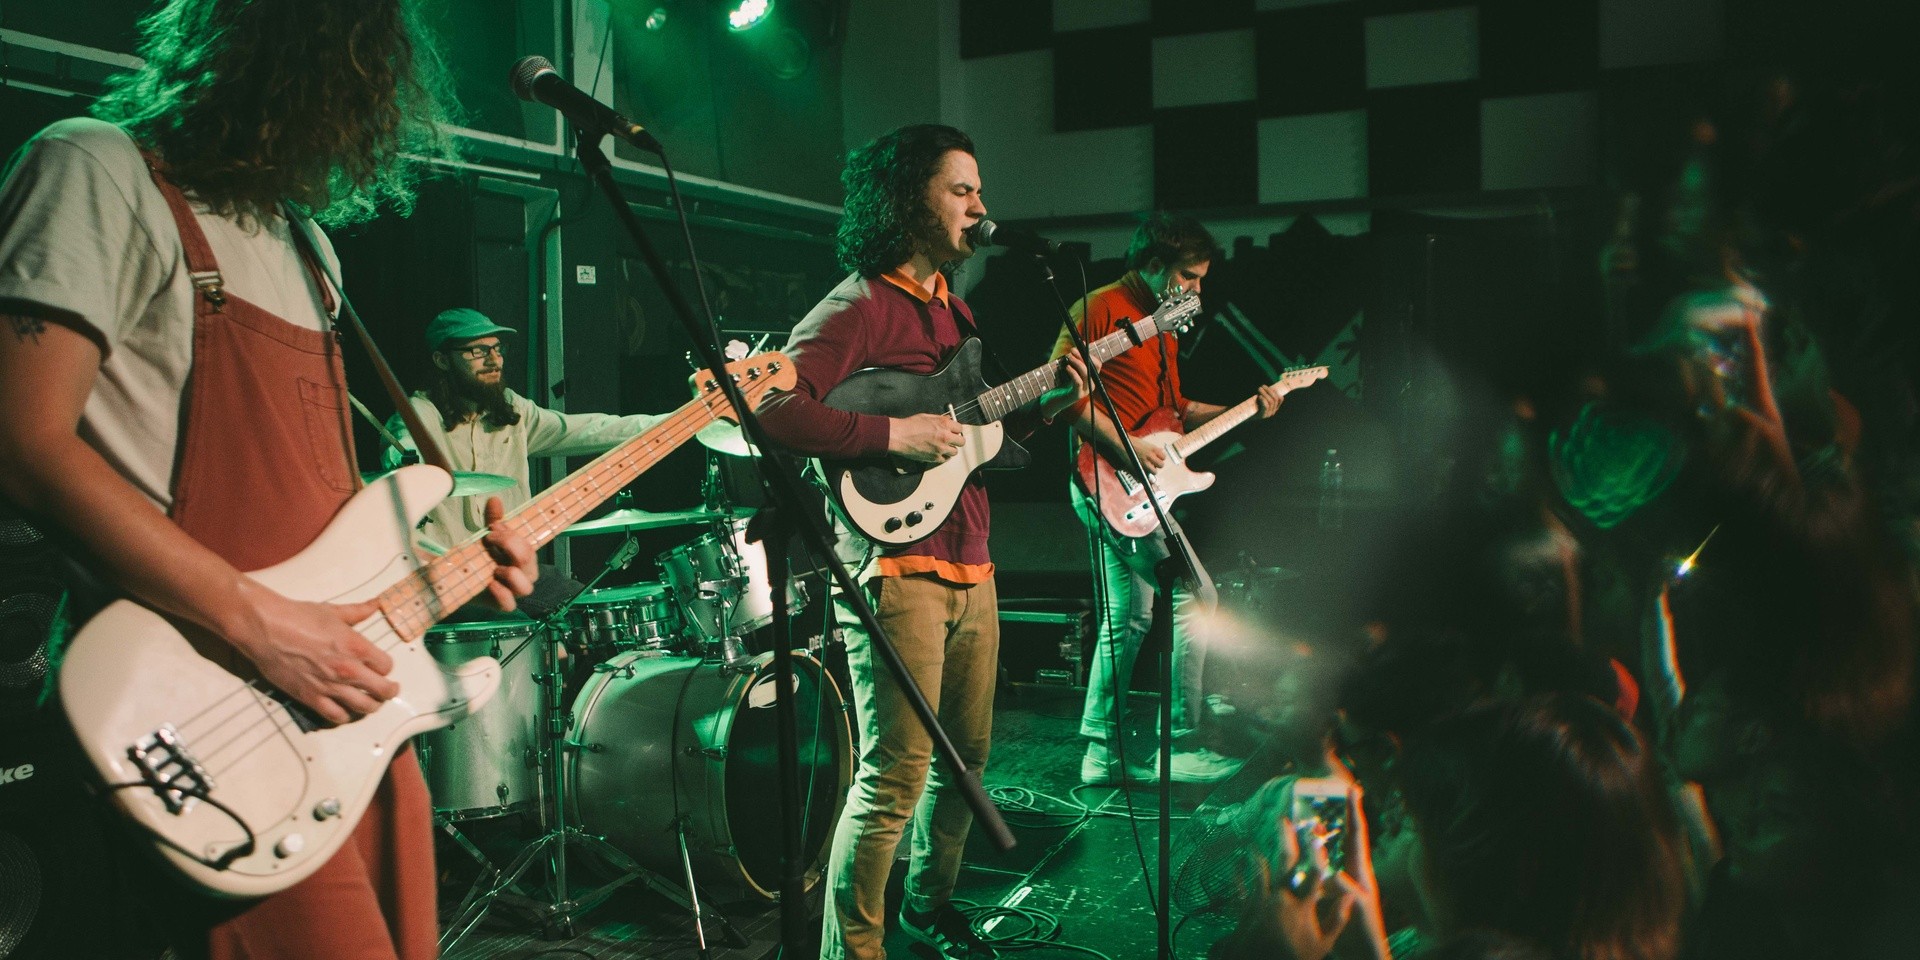 Peach Pit charm the crowd in debut Singapore shows – gig report